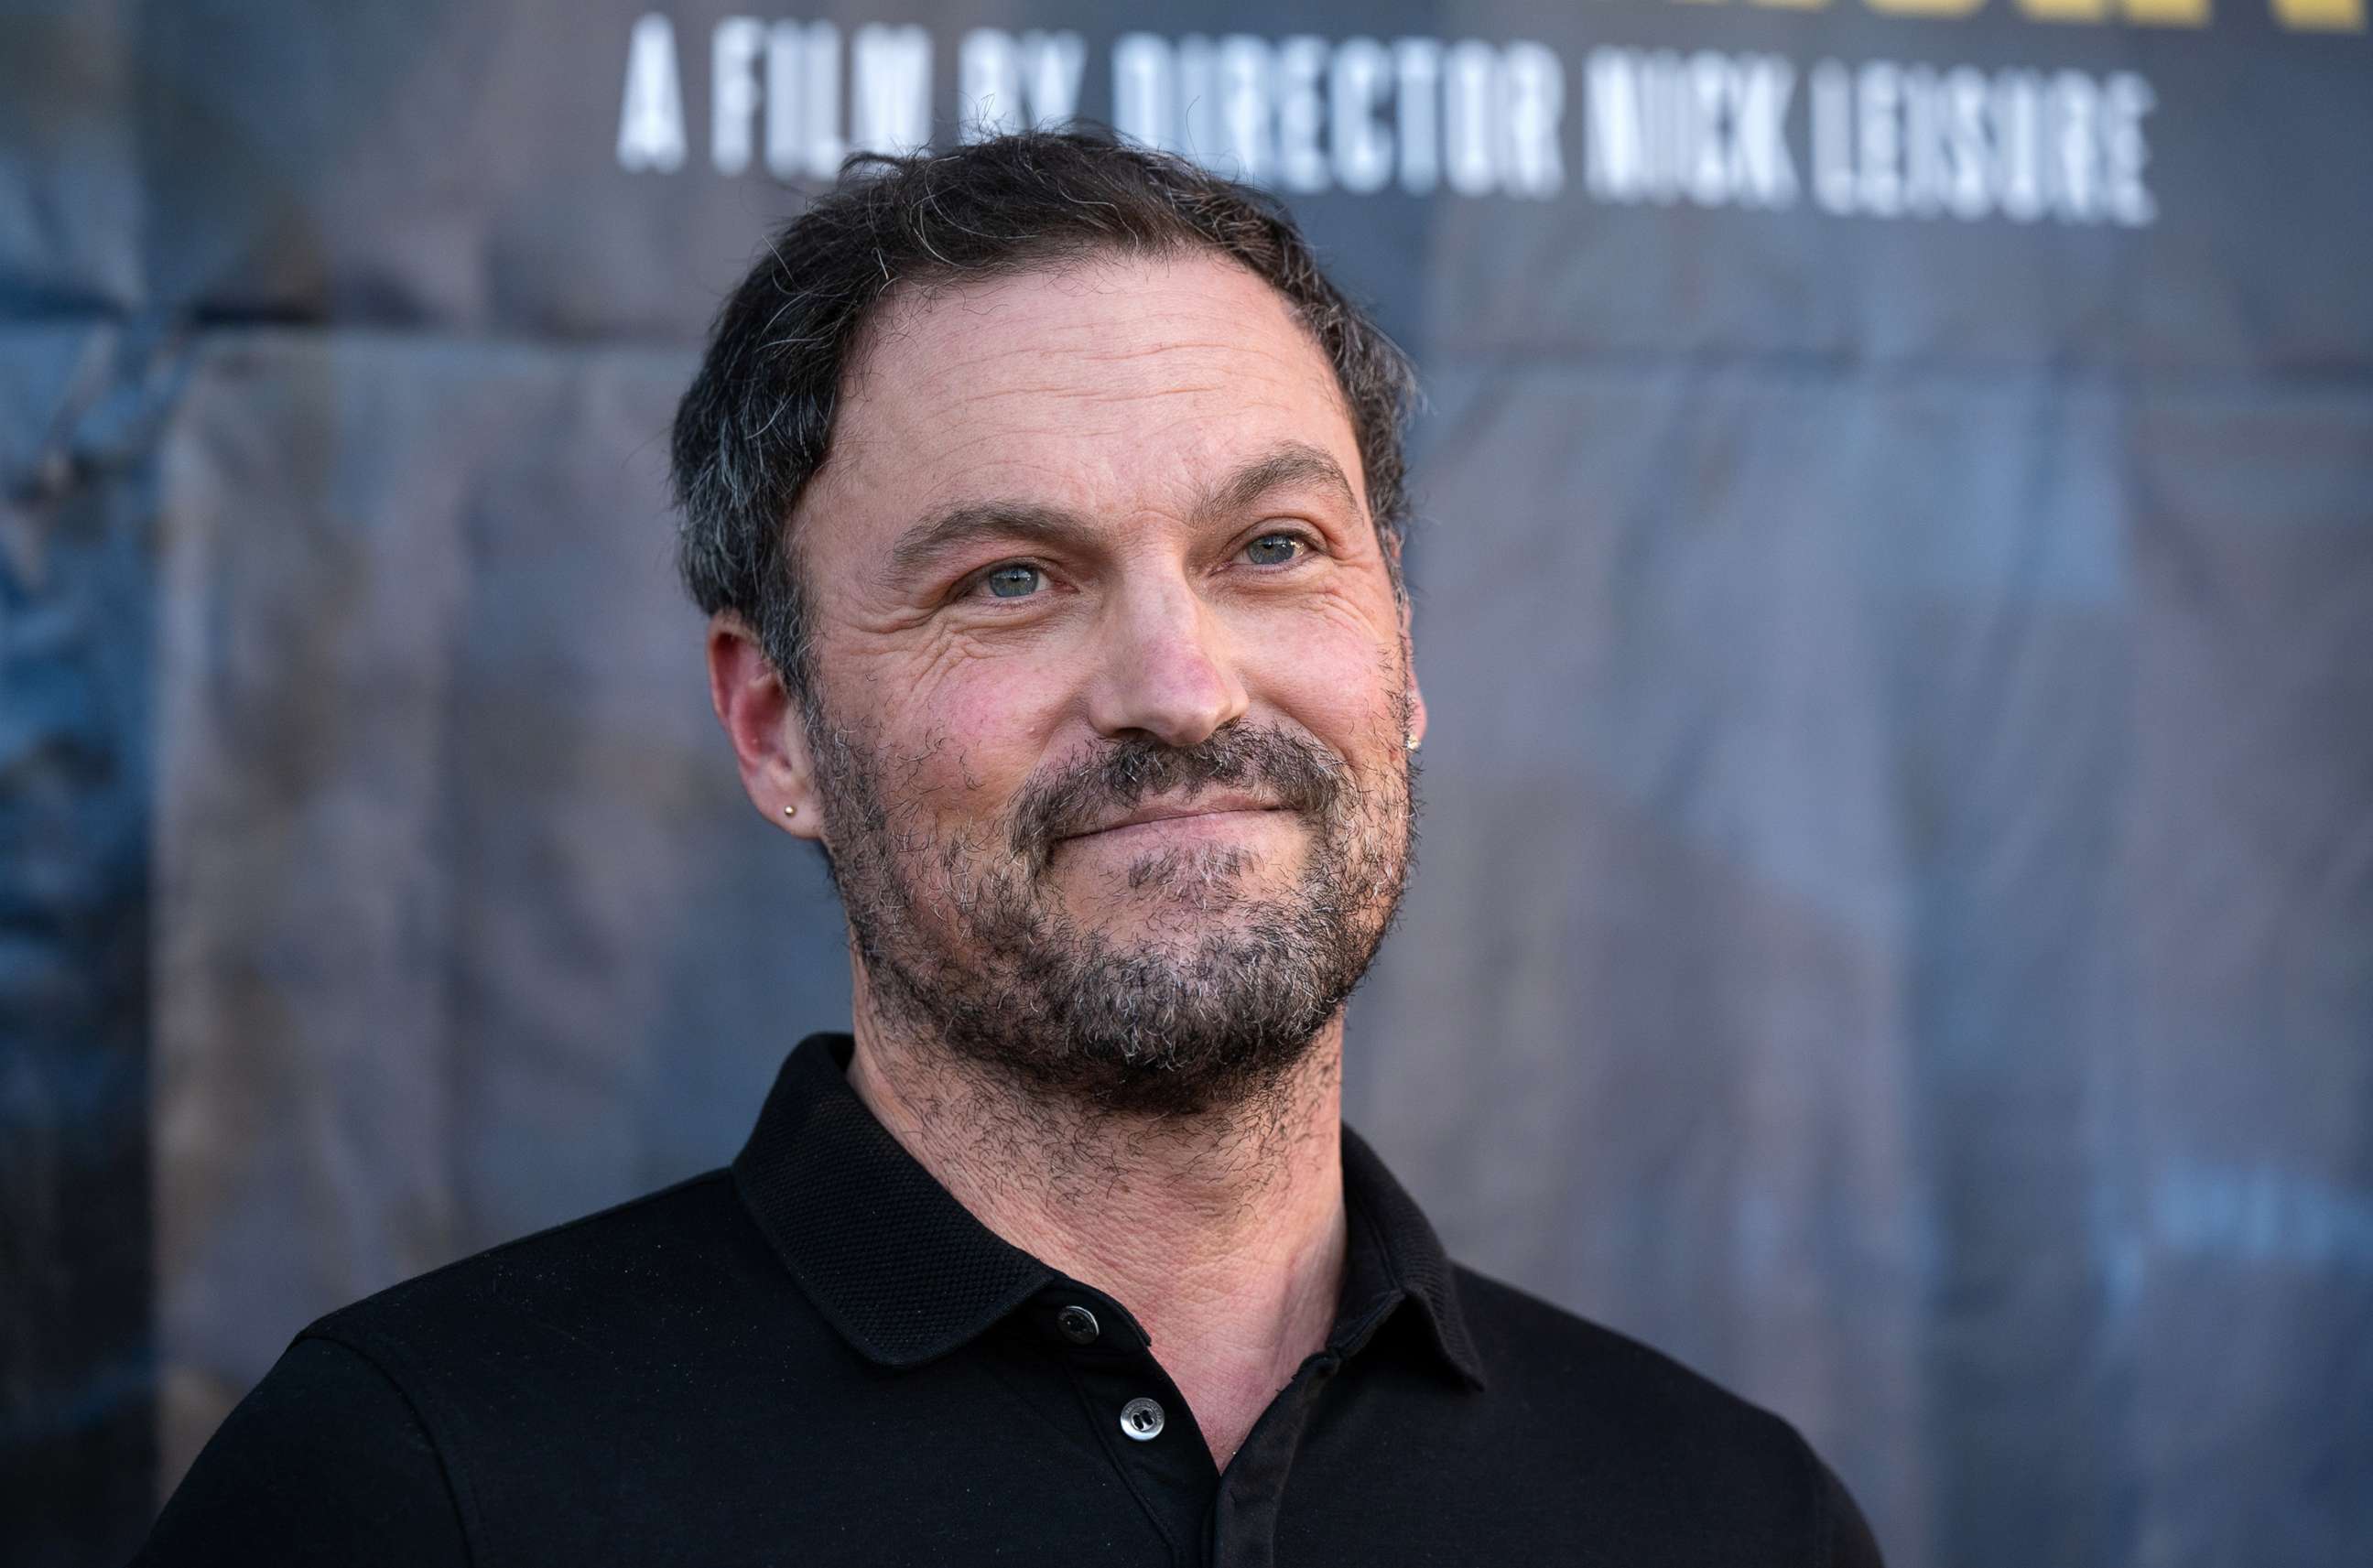 PHOTO: Actor Brian Austin Green attends the Los Angeles Premiere of "Last The Night" at the Fine Arts Theatre, June 30, 2022, in Beverly Hills, Calif.